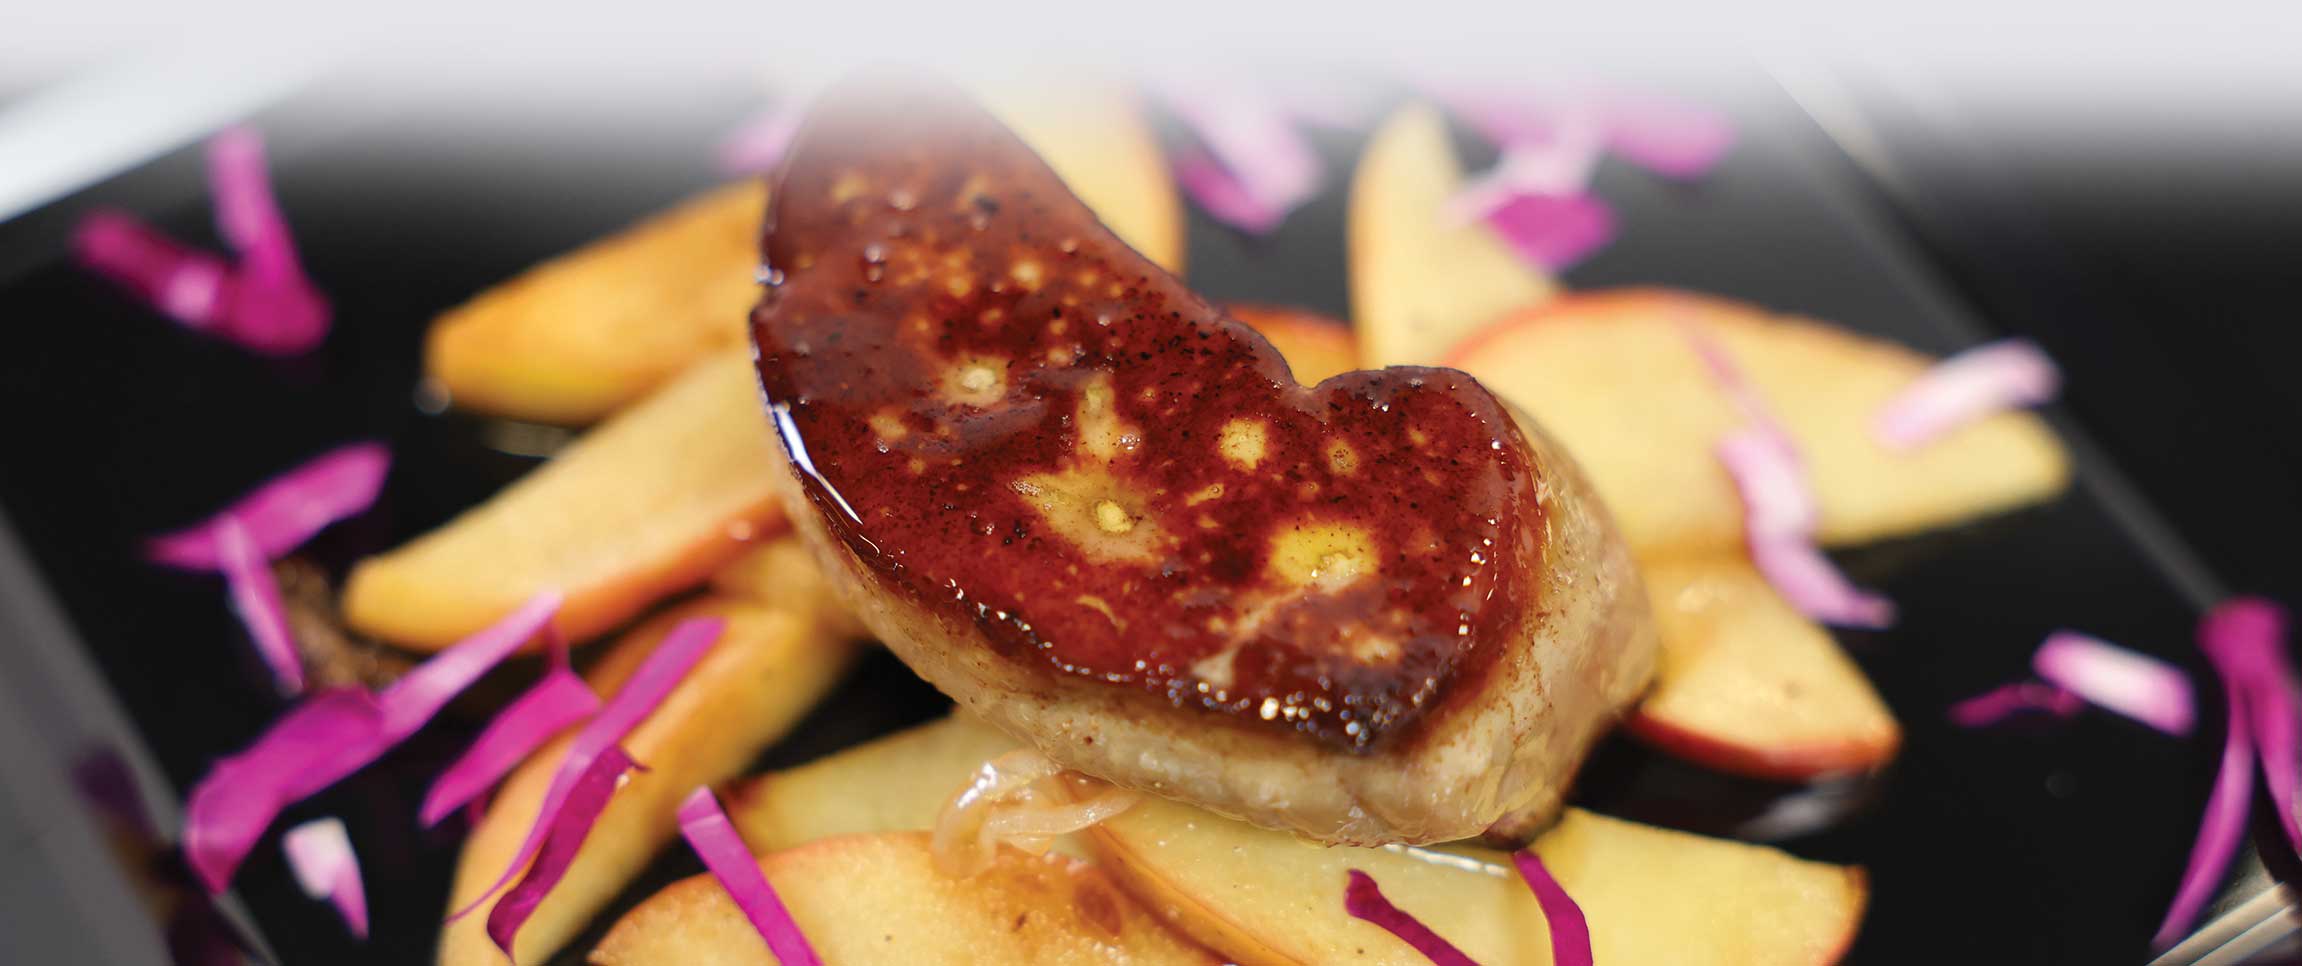 Seared Foie Gras with Apple and Shallots